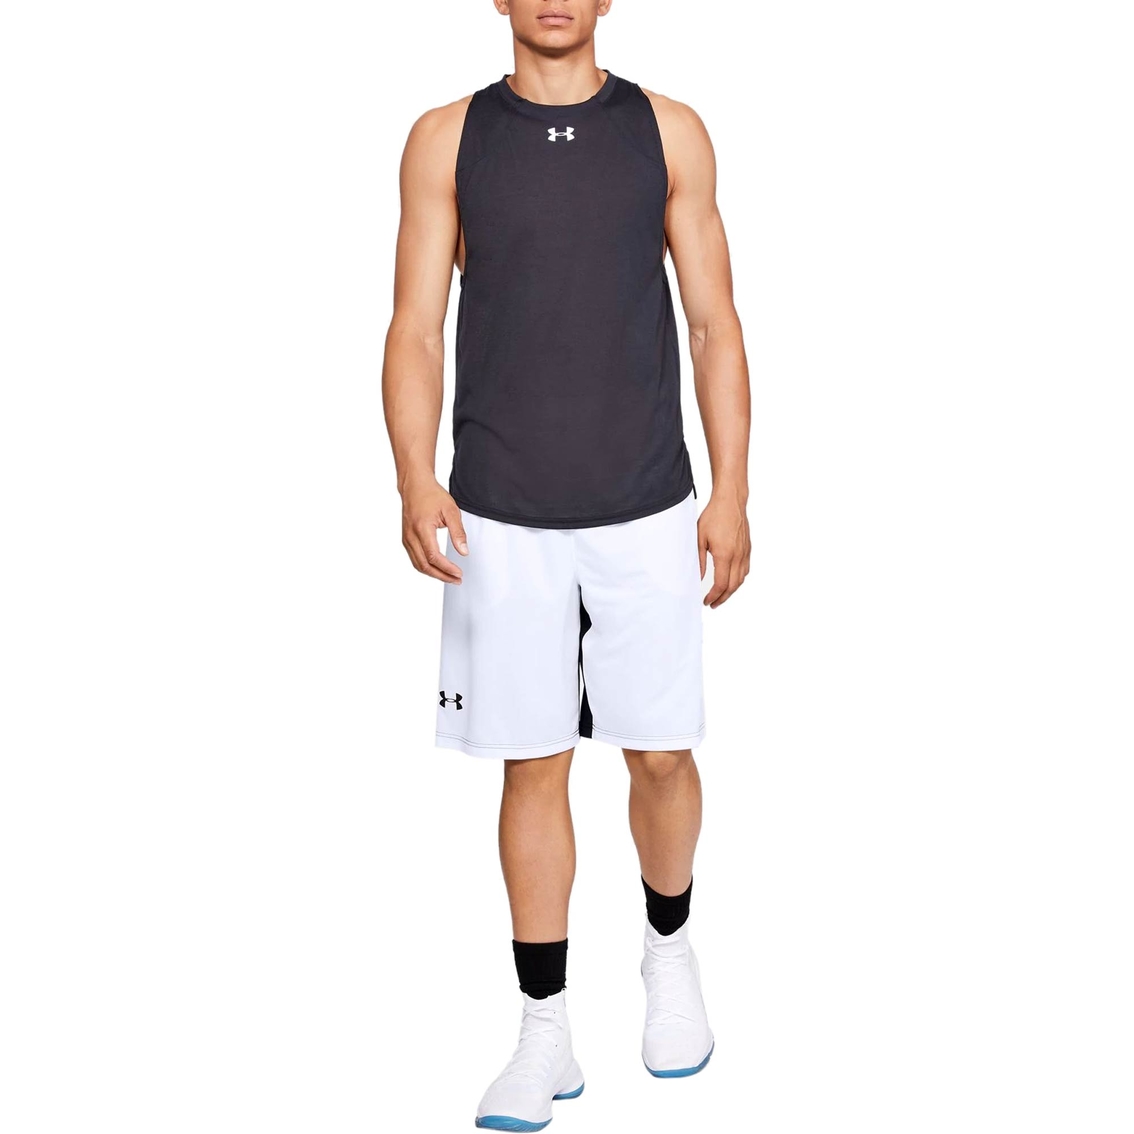 Under Armour Basketball 10 in. Shorts - Image 3 of 5